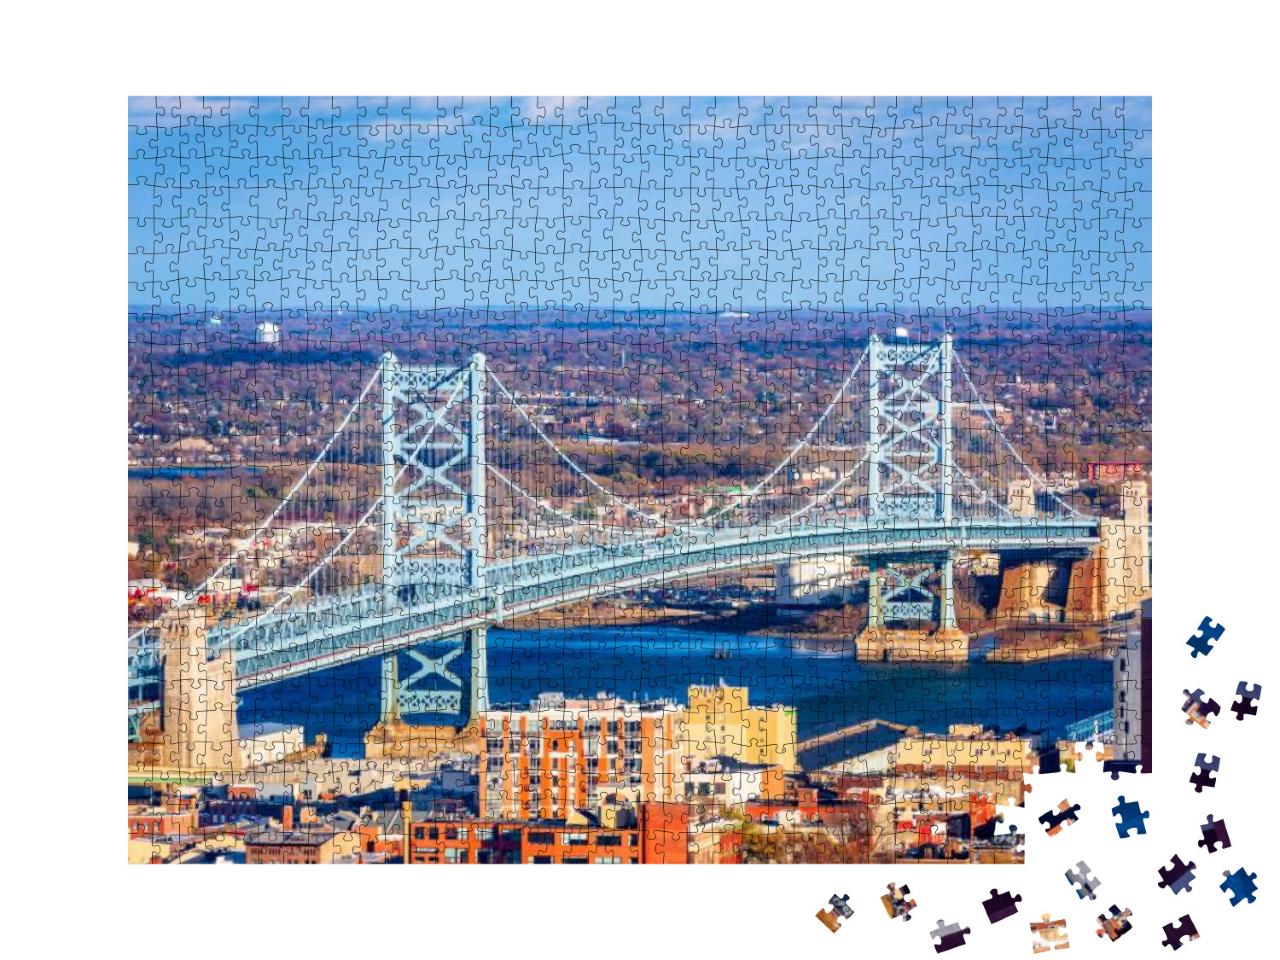 Benjamin Franklin Bridge Spanning the Delaware River from... Jigsaw Puzzle with 1000 pieces